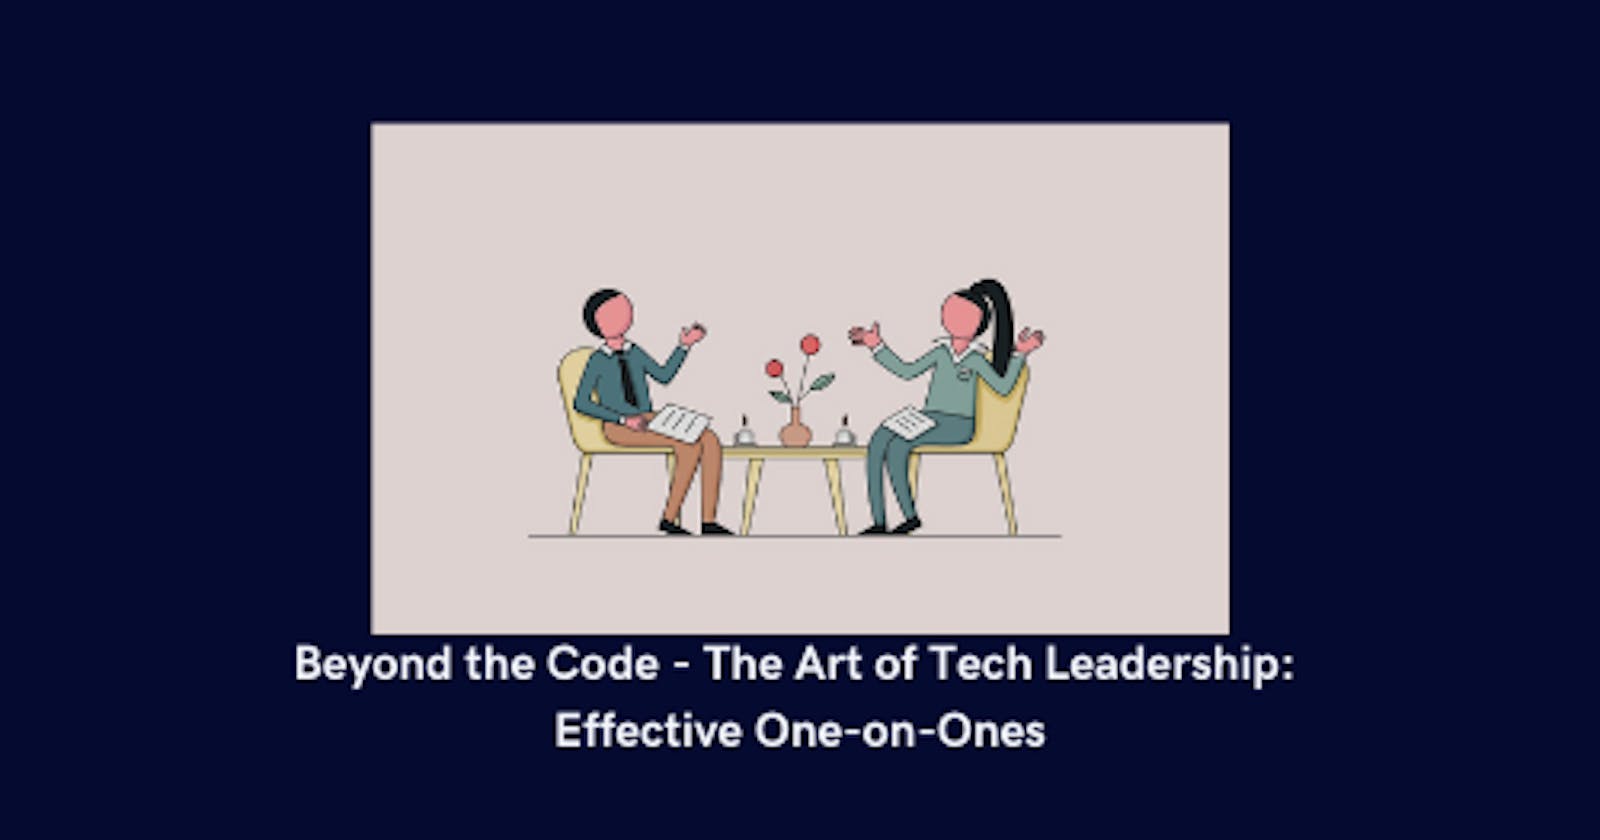 The Coffee & Code Cure: Why One-on-Ones Are Tech Leaders' Secret Weapon